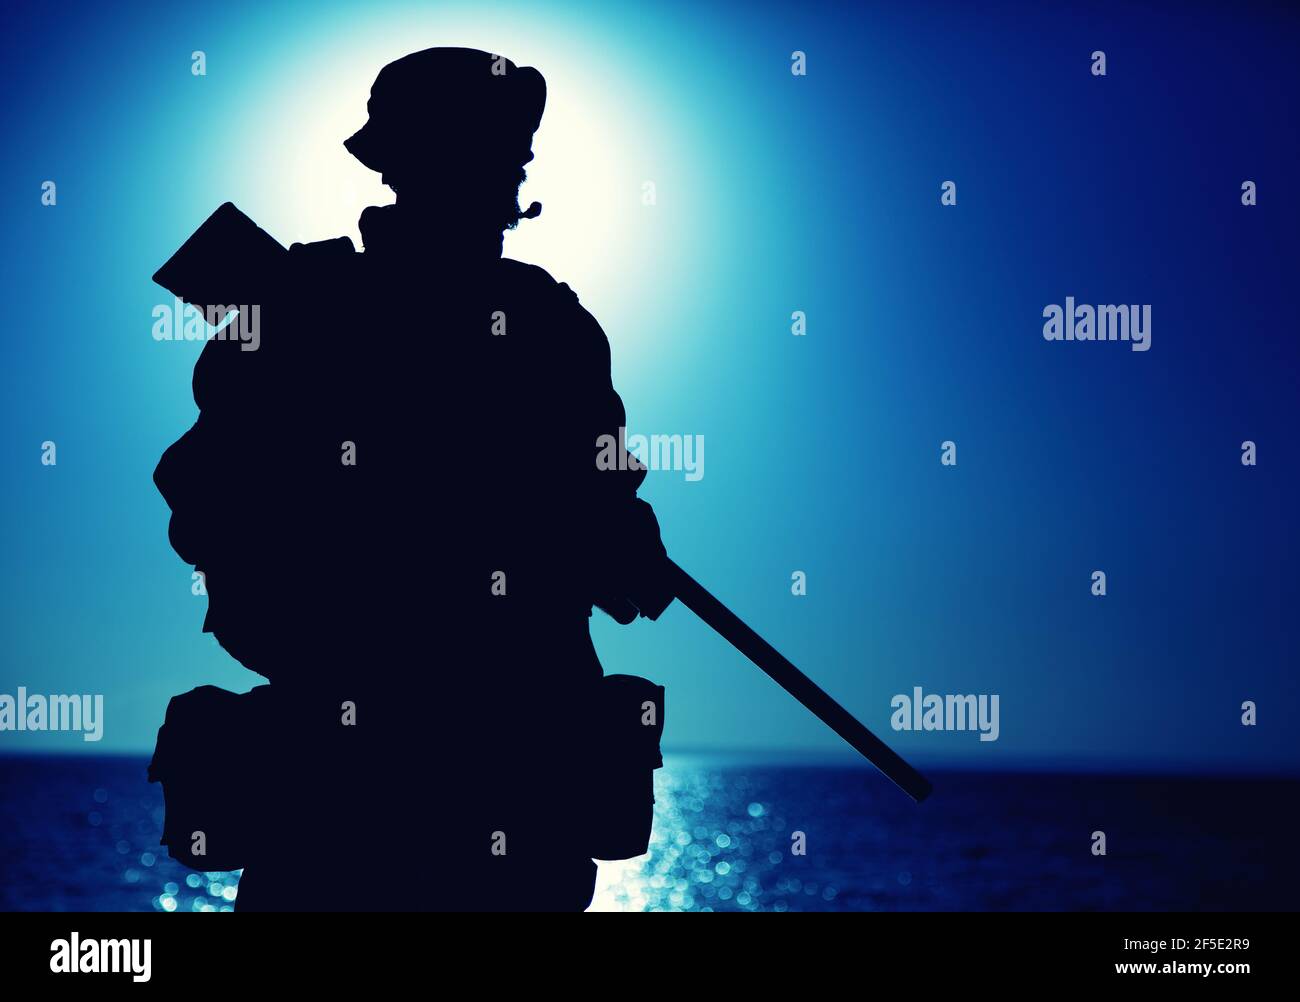 Silhouette of army elite forces fighter standing with sniper rifle on background of blue sky with moon or sun. Sniper or marksman in boonie hat, carrying backpack on mission, patrolling at night Stock Photo